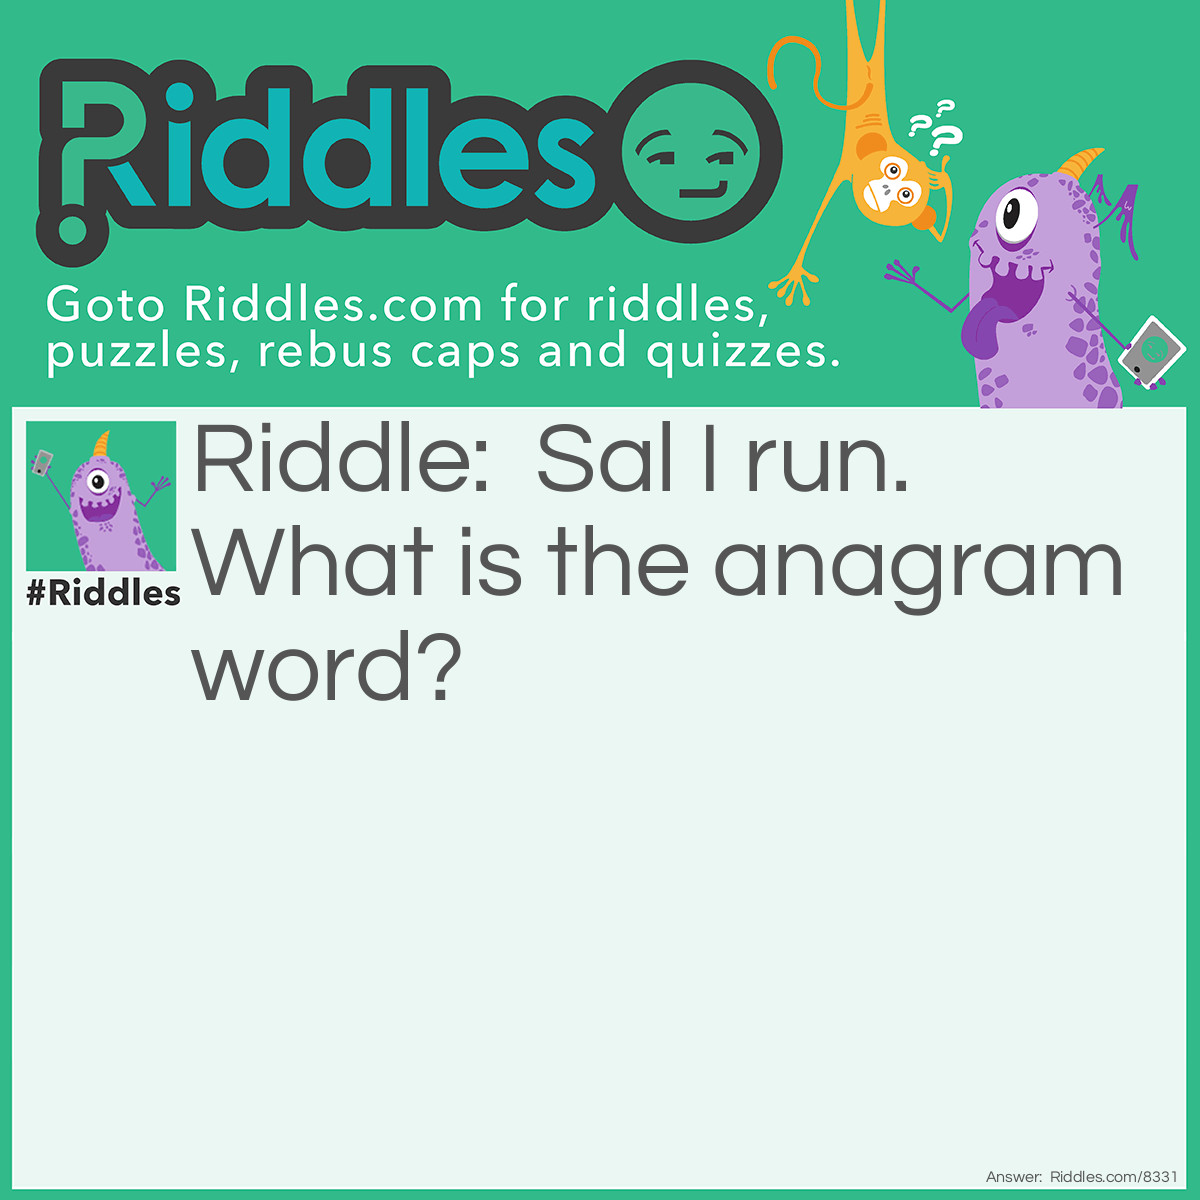 Riddle: Sal I run. What is the anagram word? Answer: Insular.